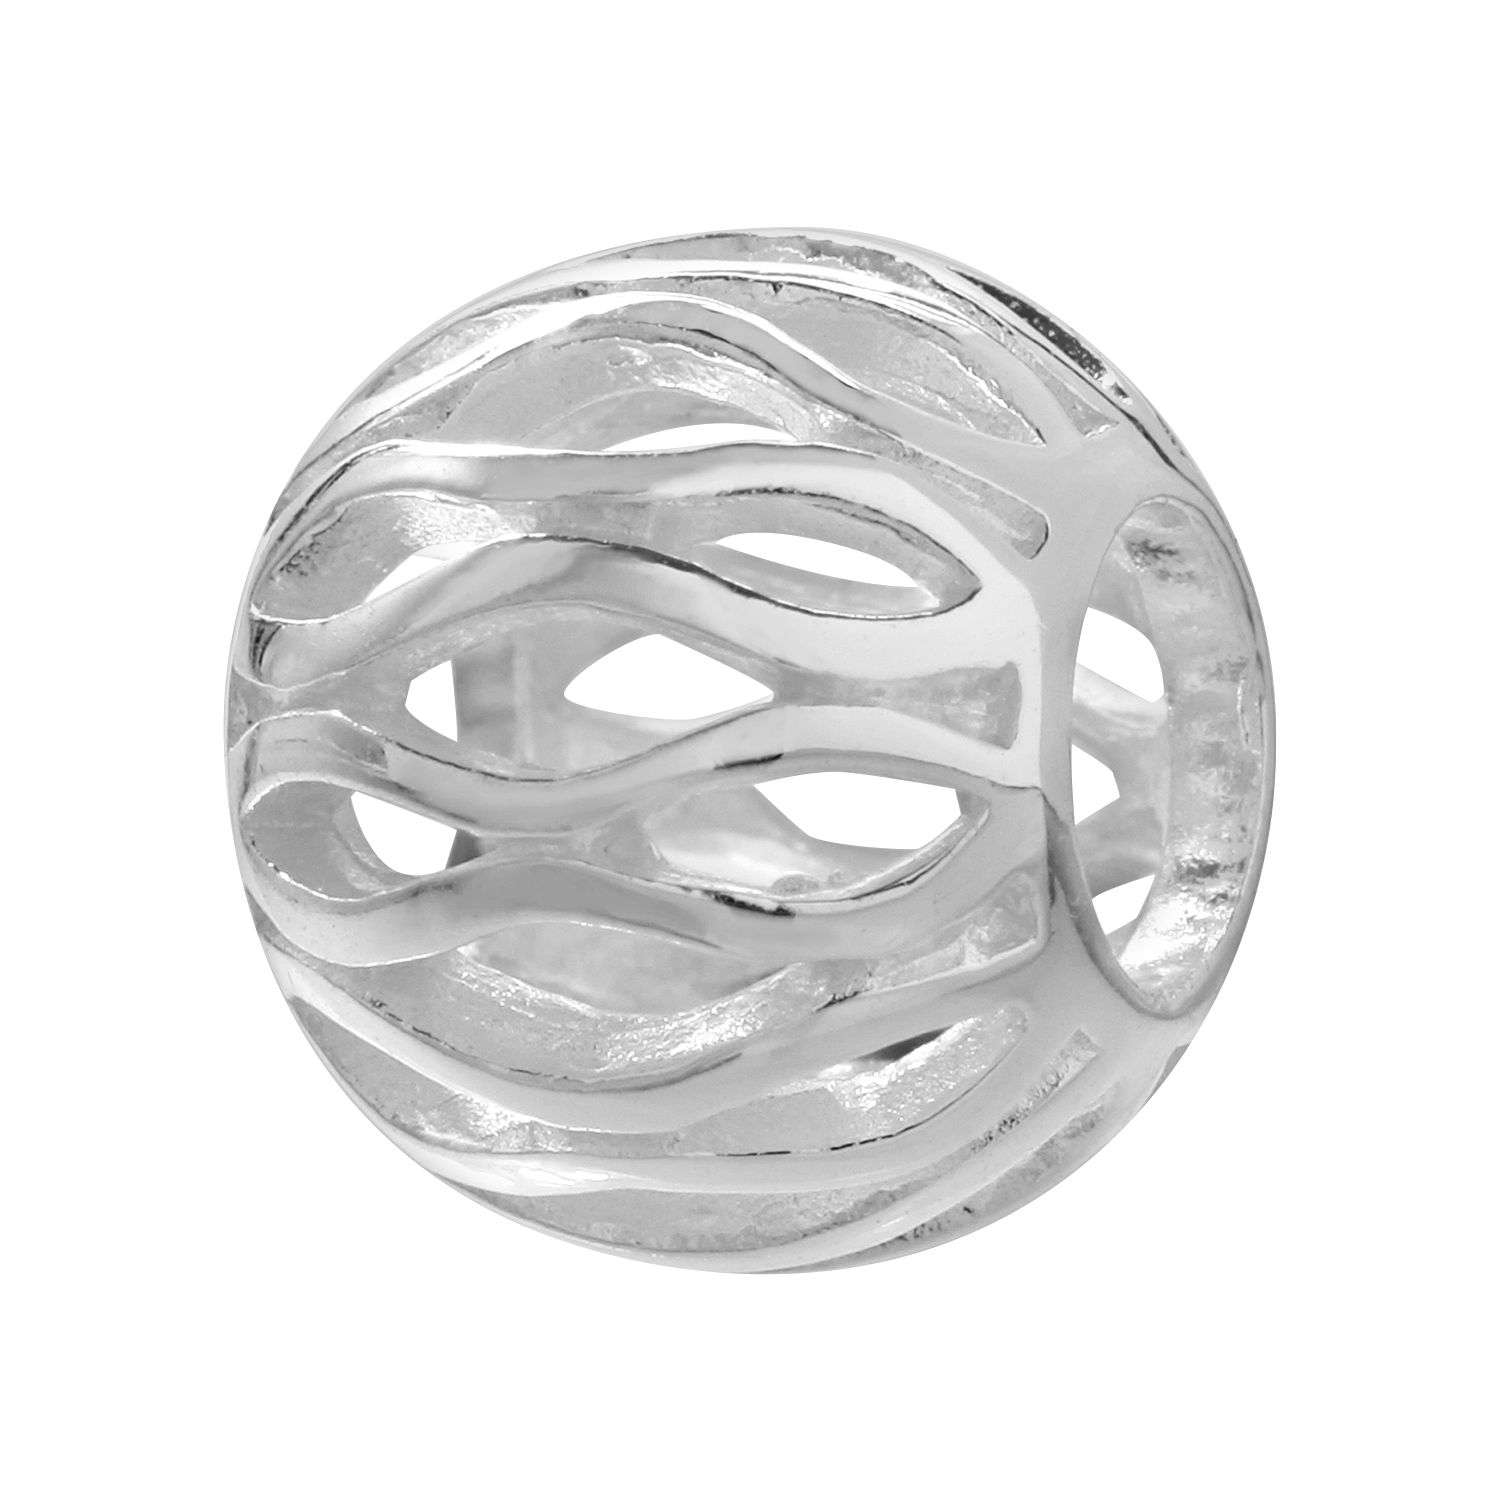 Hammered Textured Sterling Silver Spacer Bead and Slider (ONE bead) – VDI  Jewelry Findings